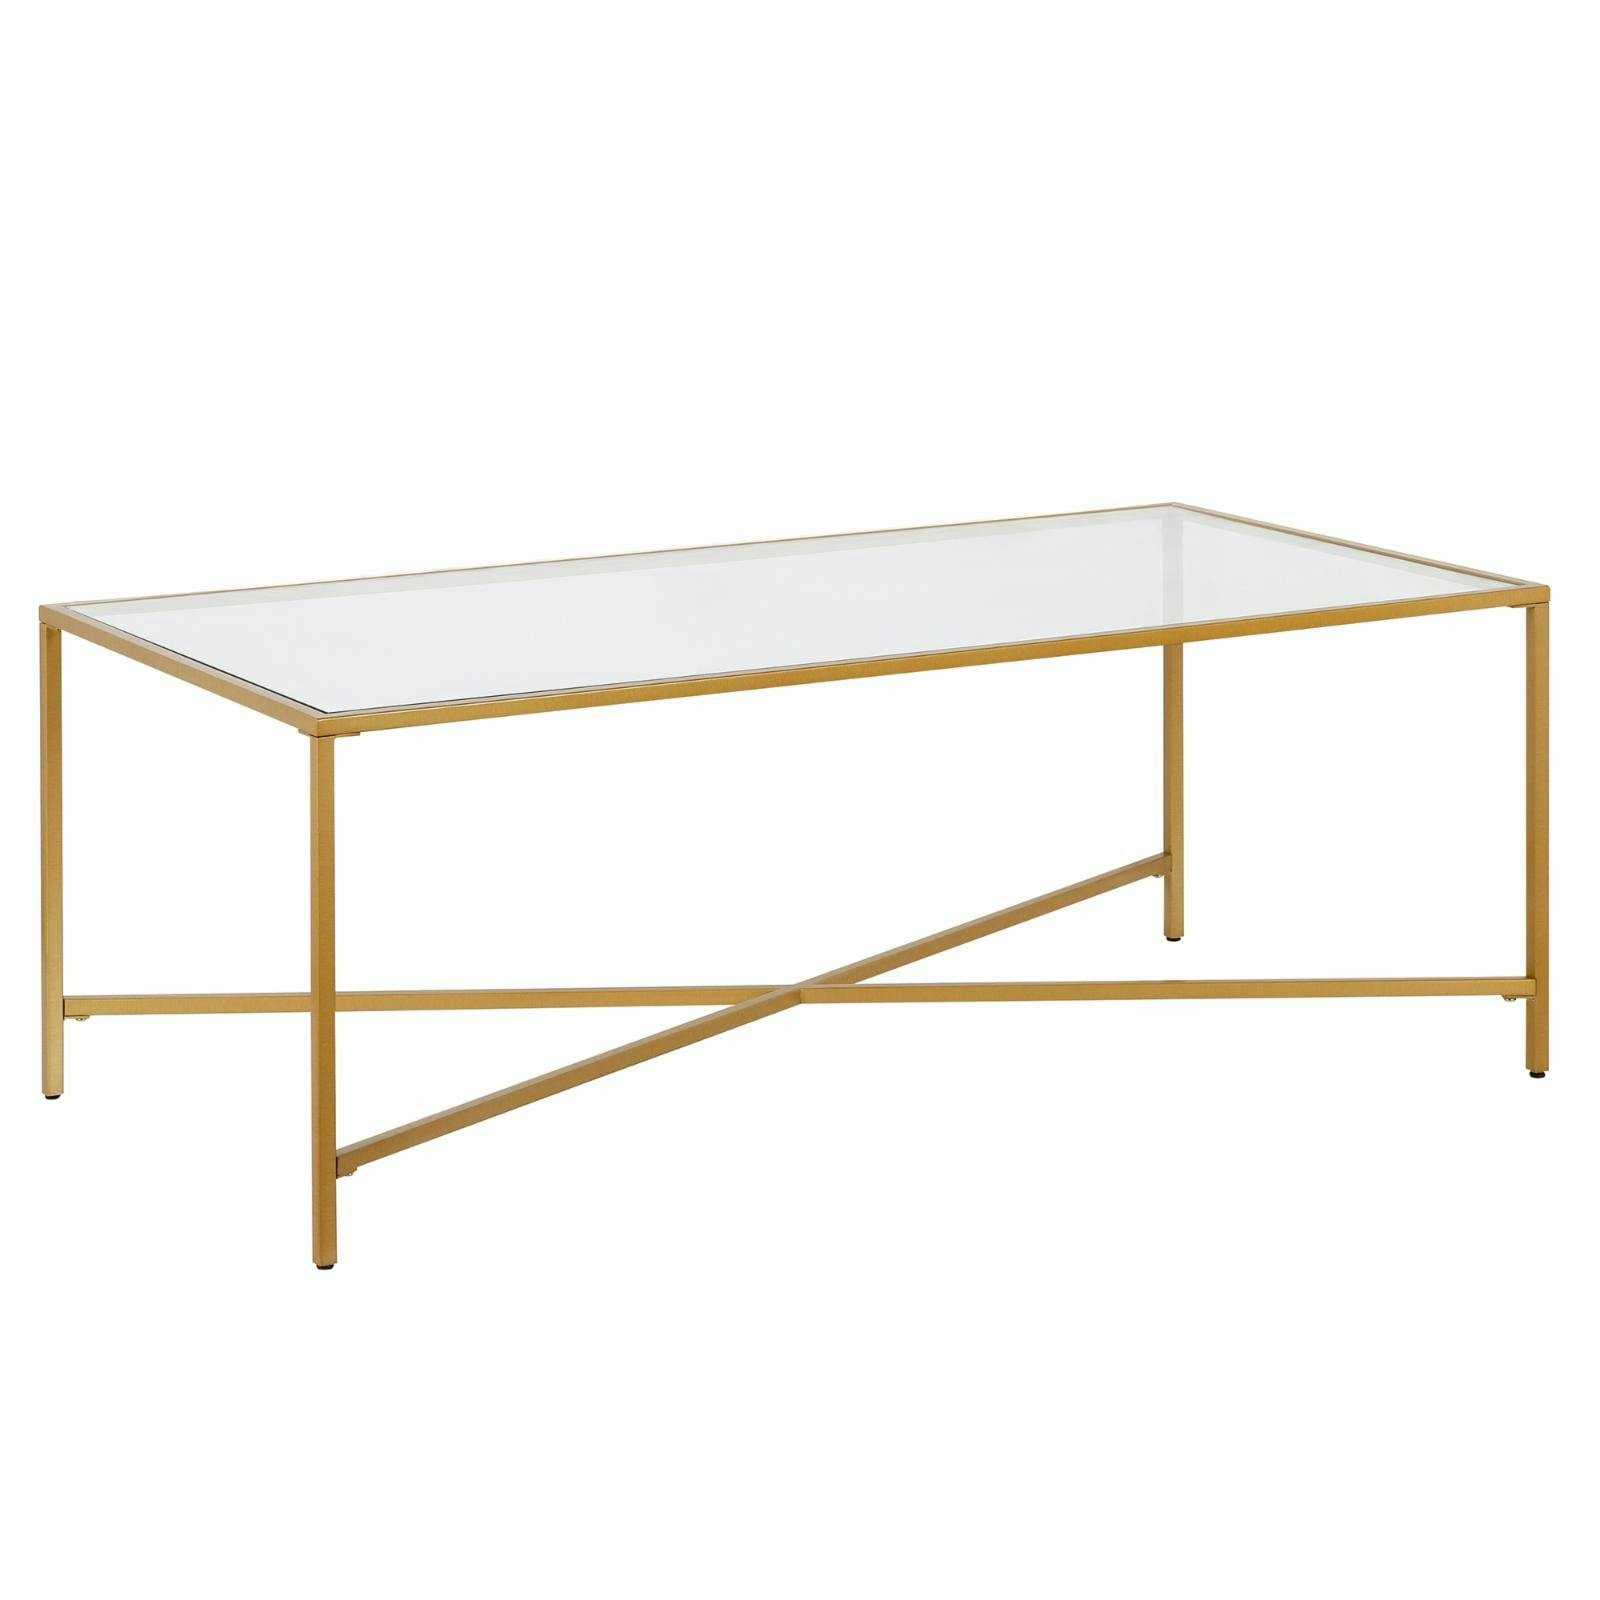 Henley Rectangular Brass Finish Coffee Table with Glass Top